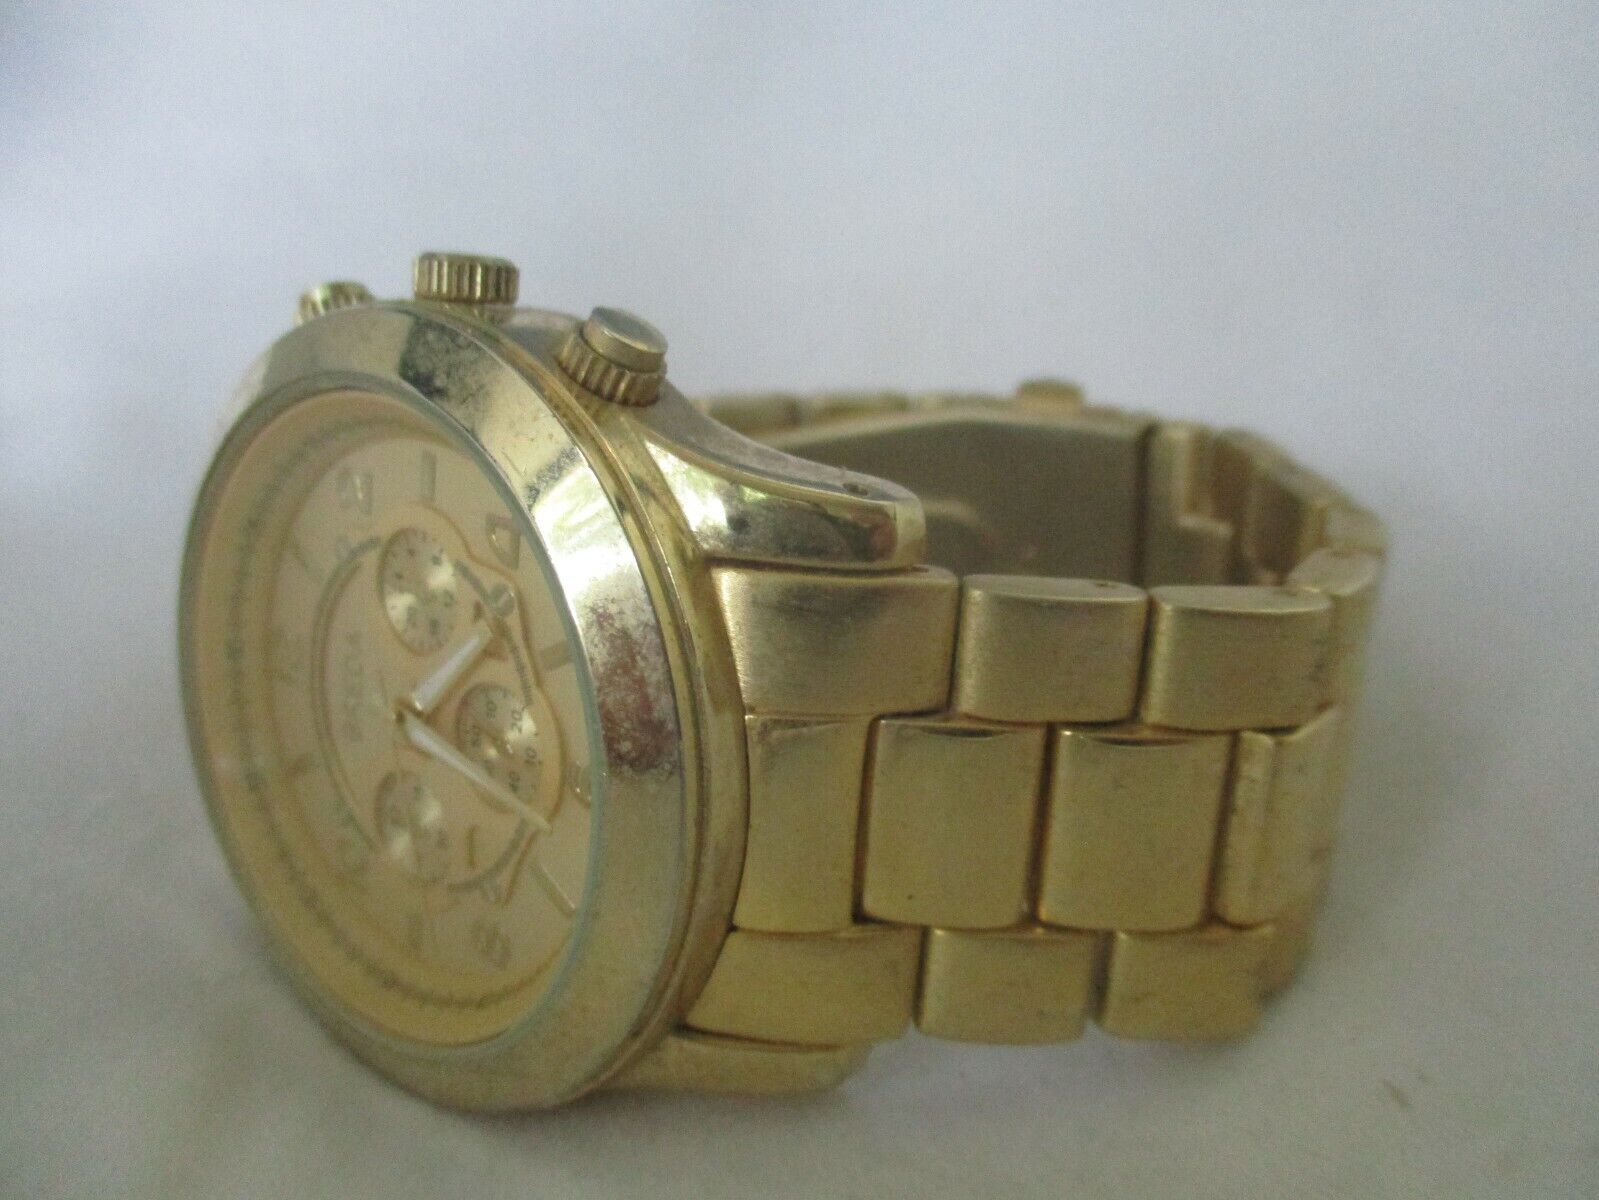 Breda Wristwatch Gold Tone Stainless Steel Band Round Face Simple Style